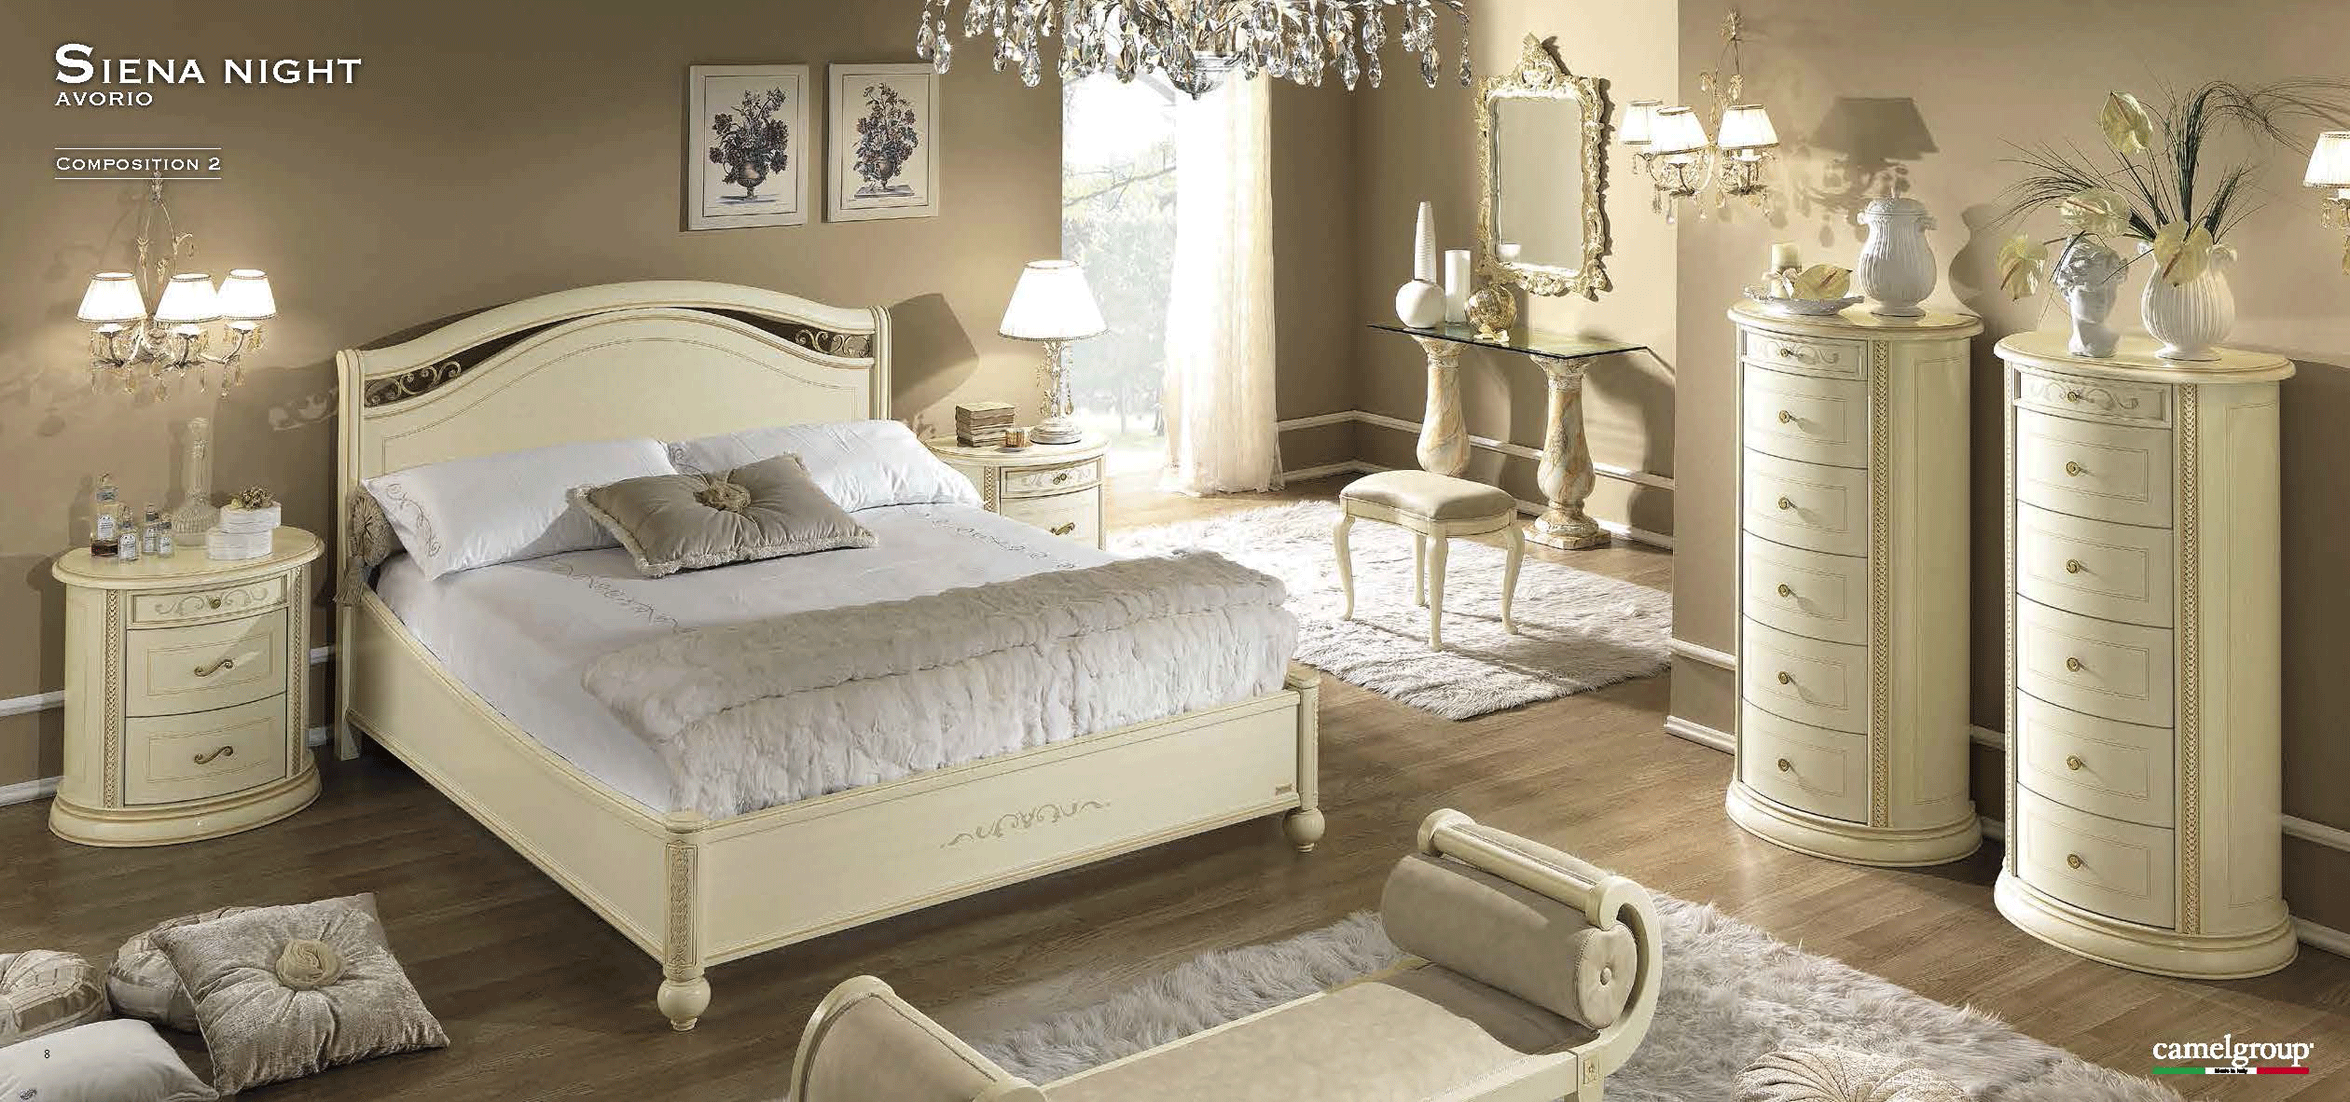 Brands Camel Classic Living Rooms, Italy Siena Night Ivory